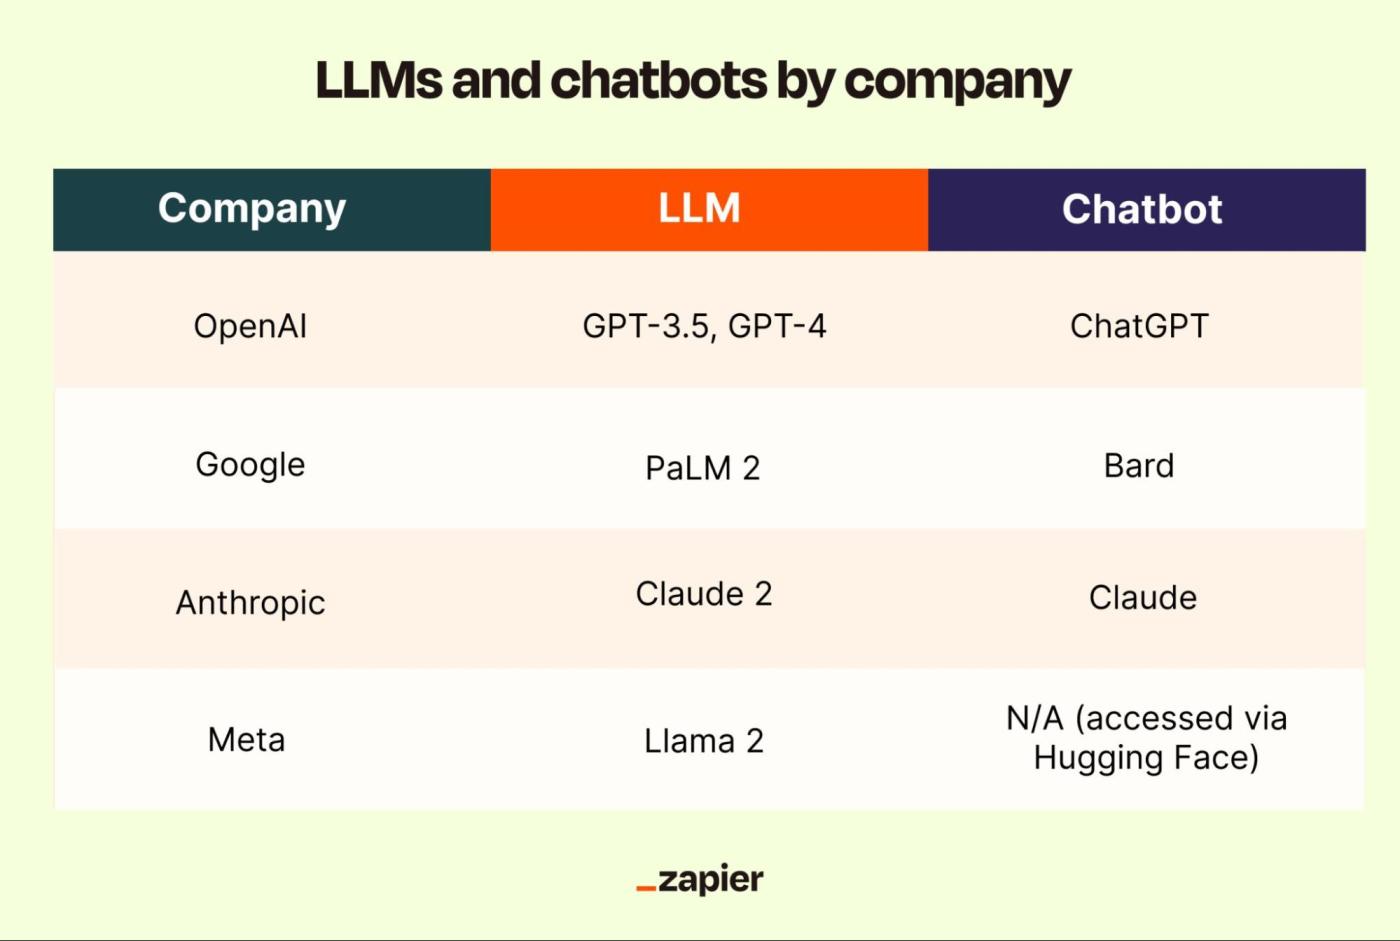 An infographic showing the names of  OpenAI's, Google's, Anthropic's, and Meta's LLMs and chatbots